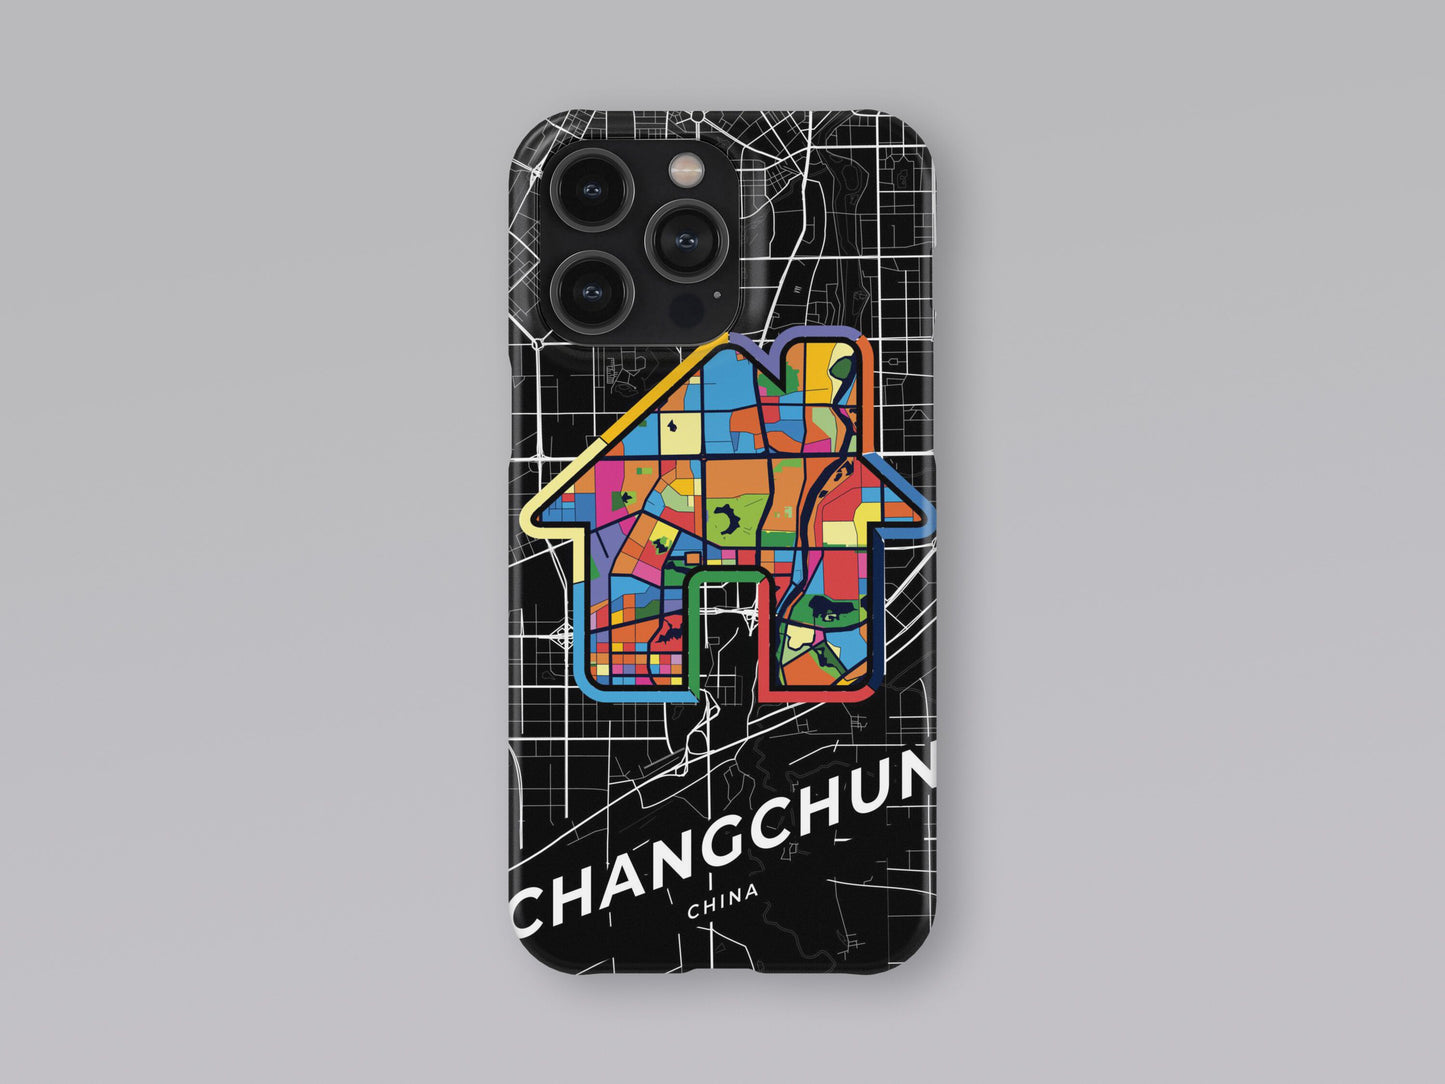 Changchun China slim phone case with colorful icon. Birthday, wedding or housewarming gift. Couple match cases. 3